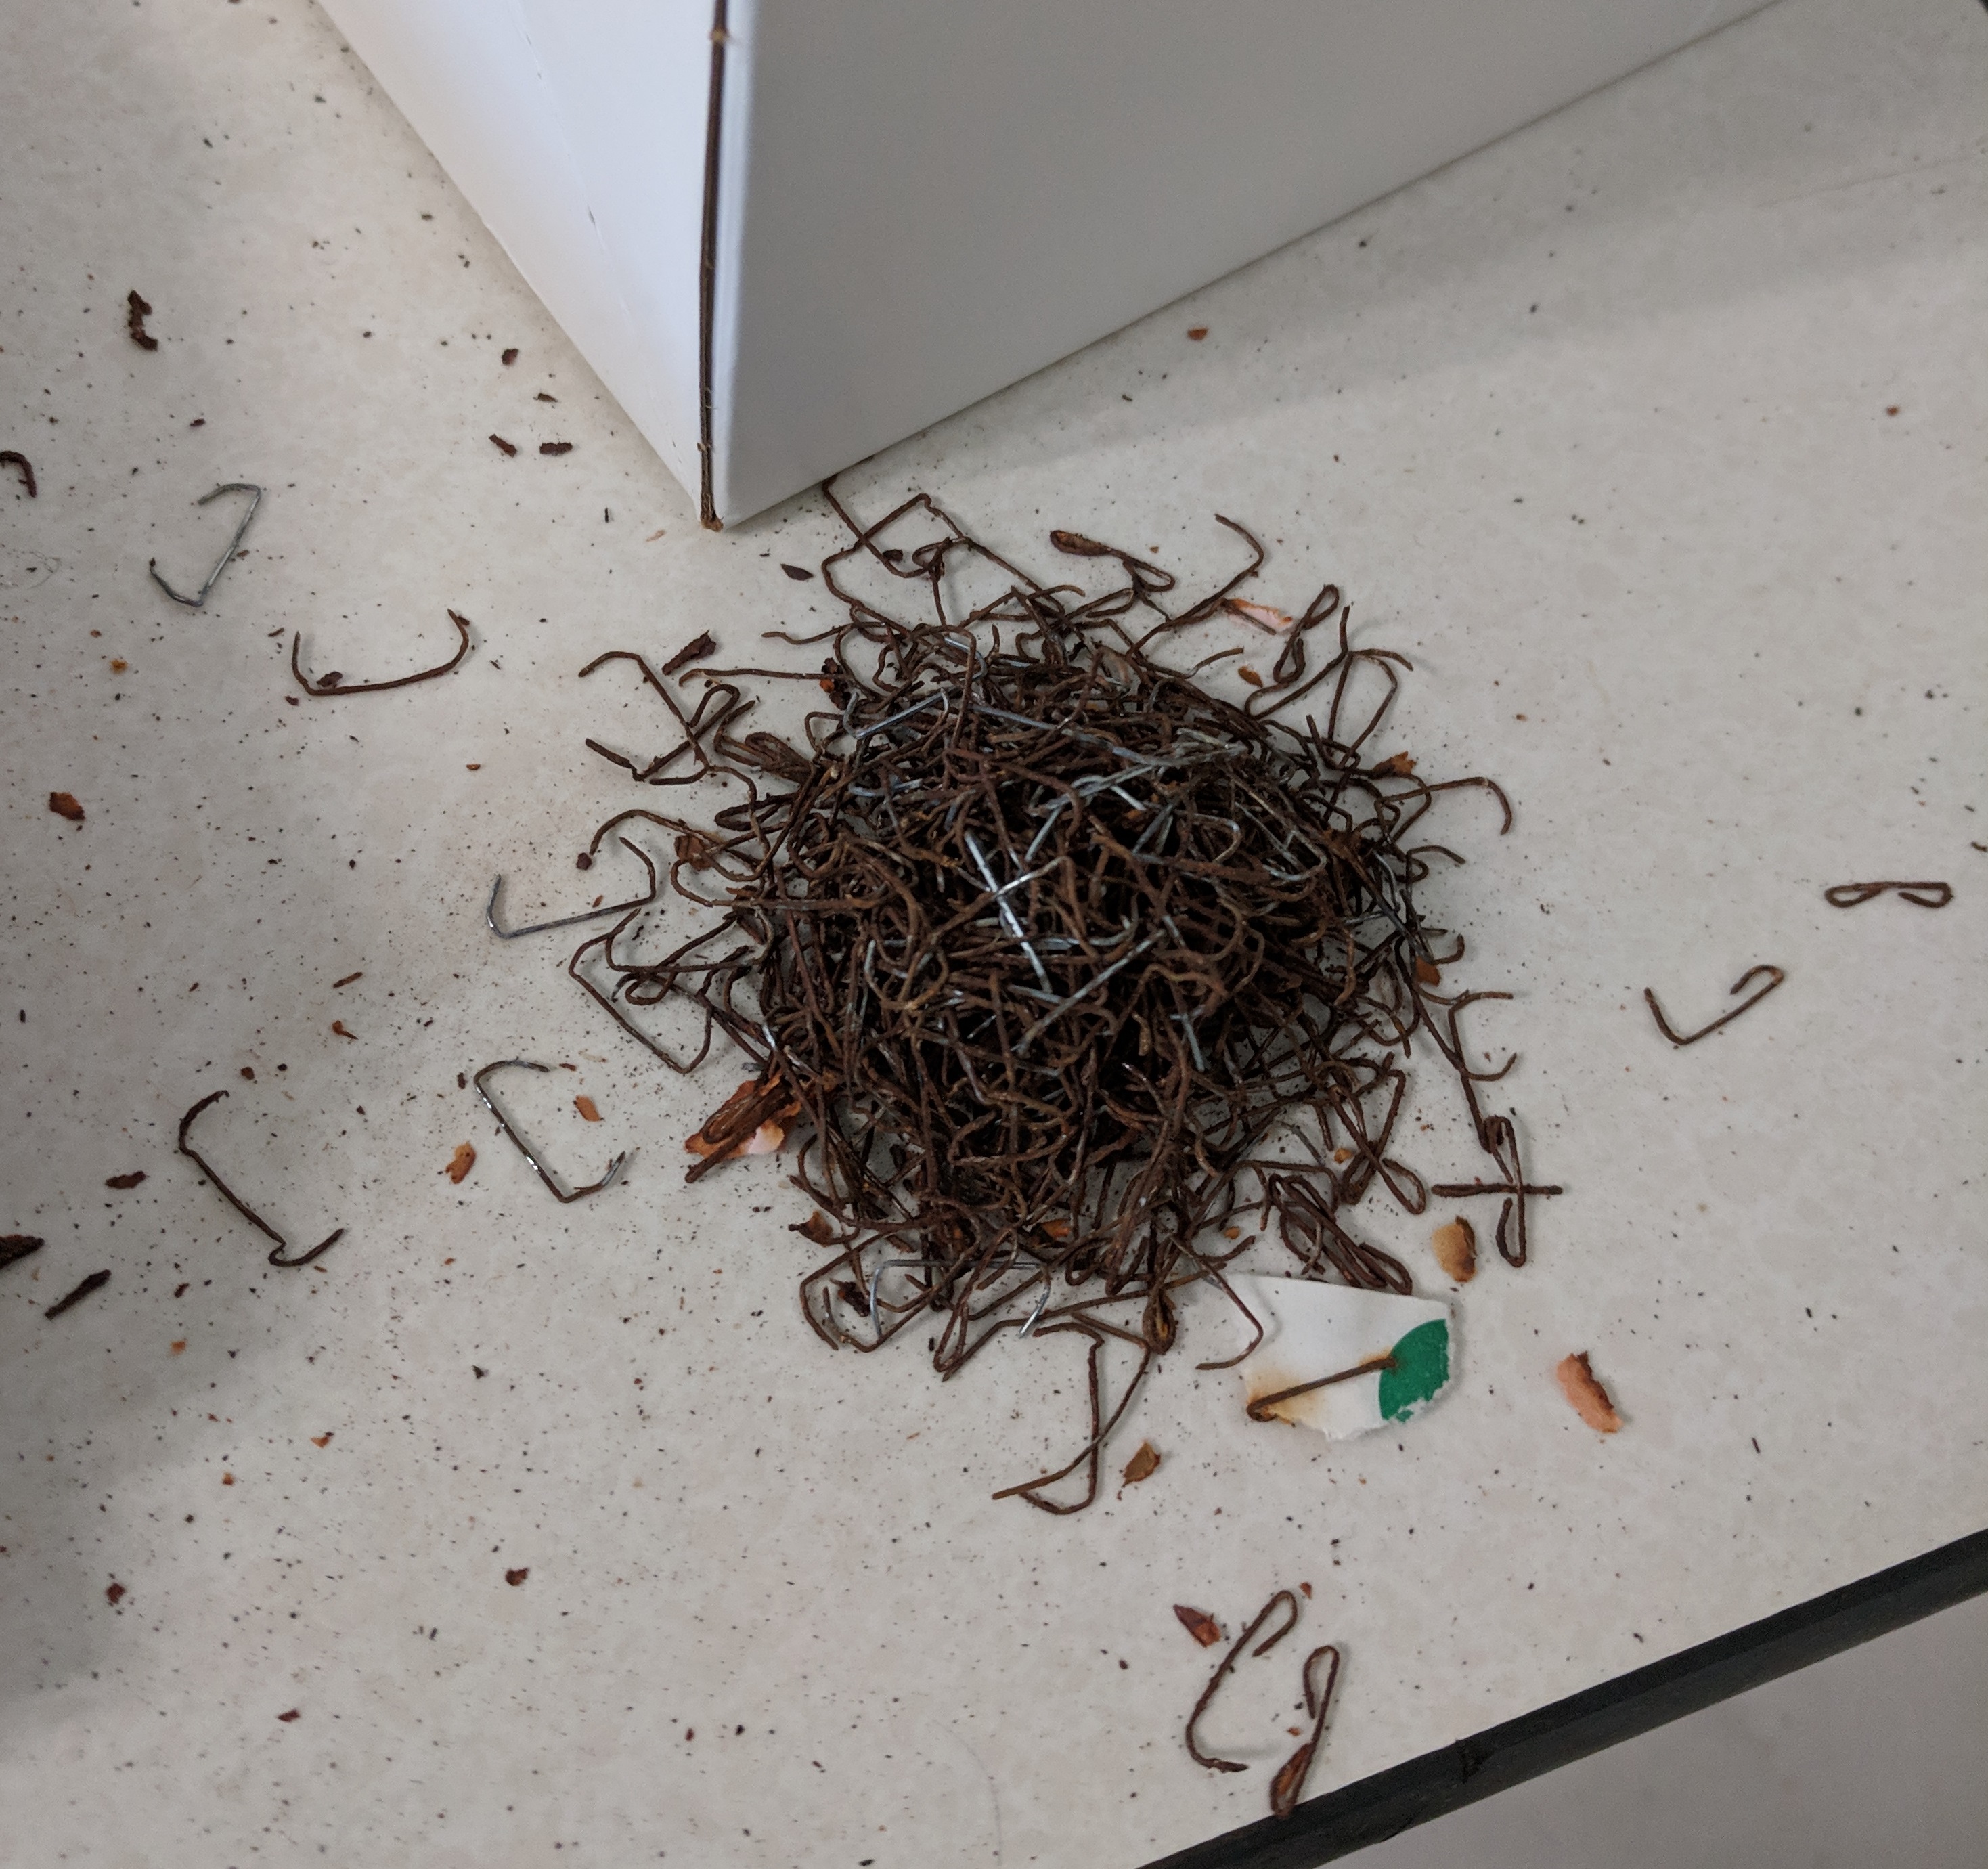 A closeup of a pile of several hundred rusty staples on a desk.